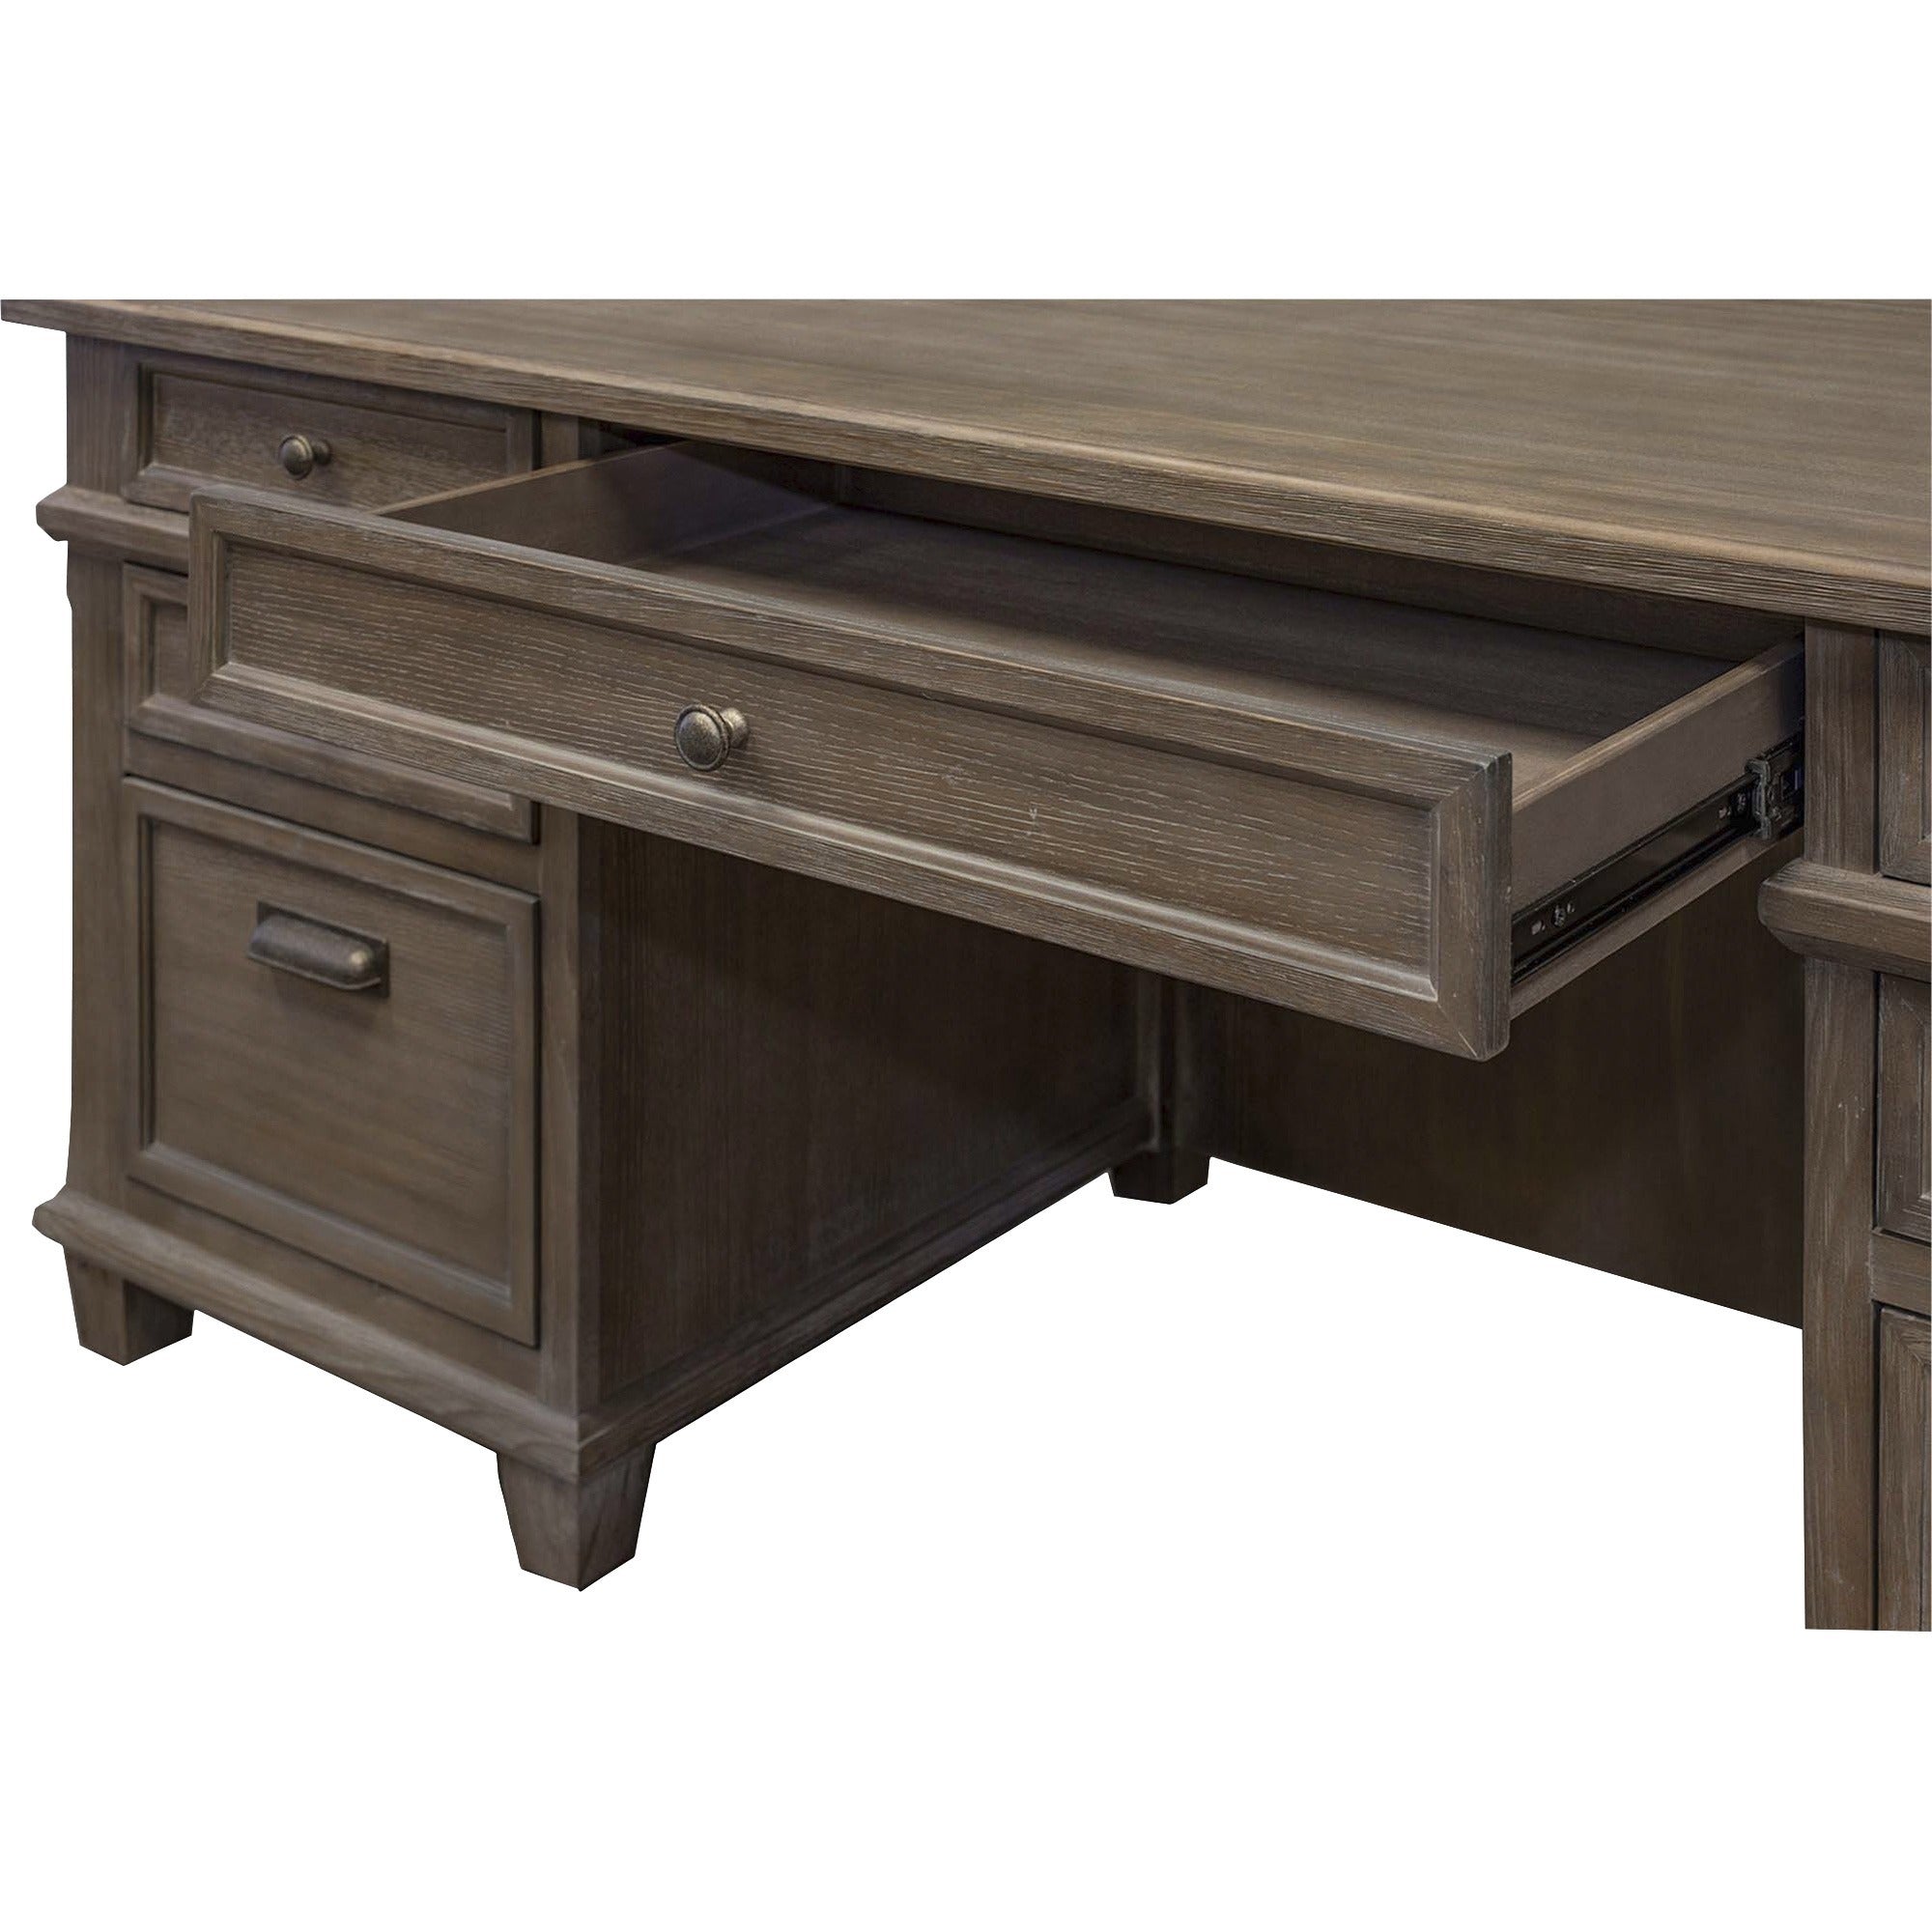 martin-carson-double-pedestal-desk-7-drawer-7-x-storage-utility-file-drawers-double-pedestal-material-veneer-solid-lumber-finish-weathered-dove_mrtimca680 - 5